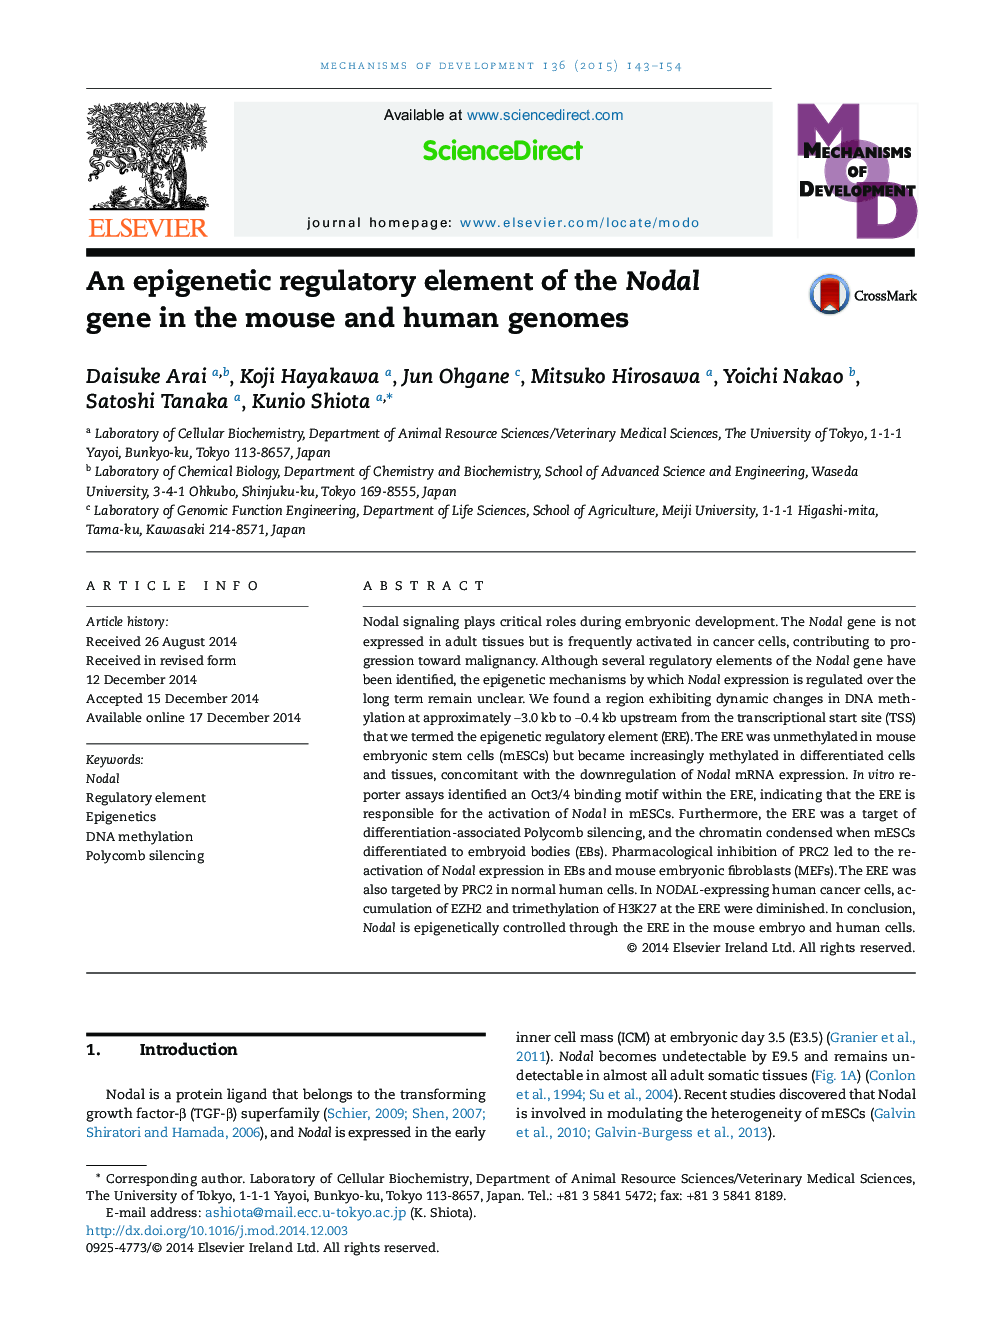 An epigenetic regulatory element of the Nodal gene in the mouse and human genomes